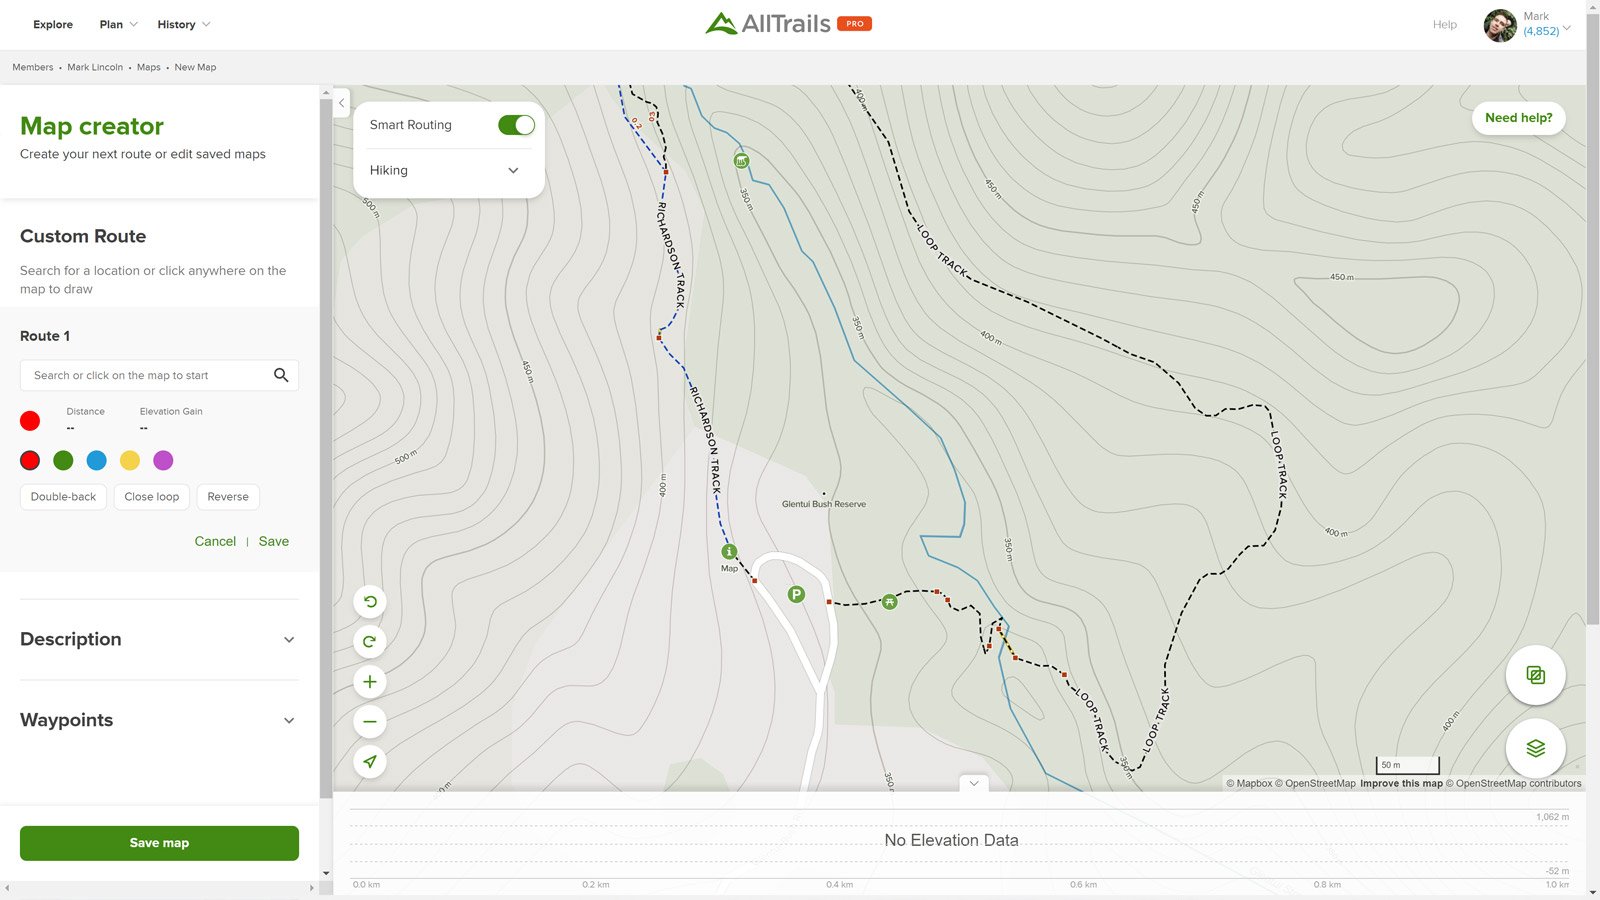 Creating a Route in AllTrails